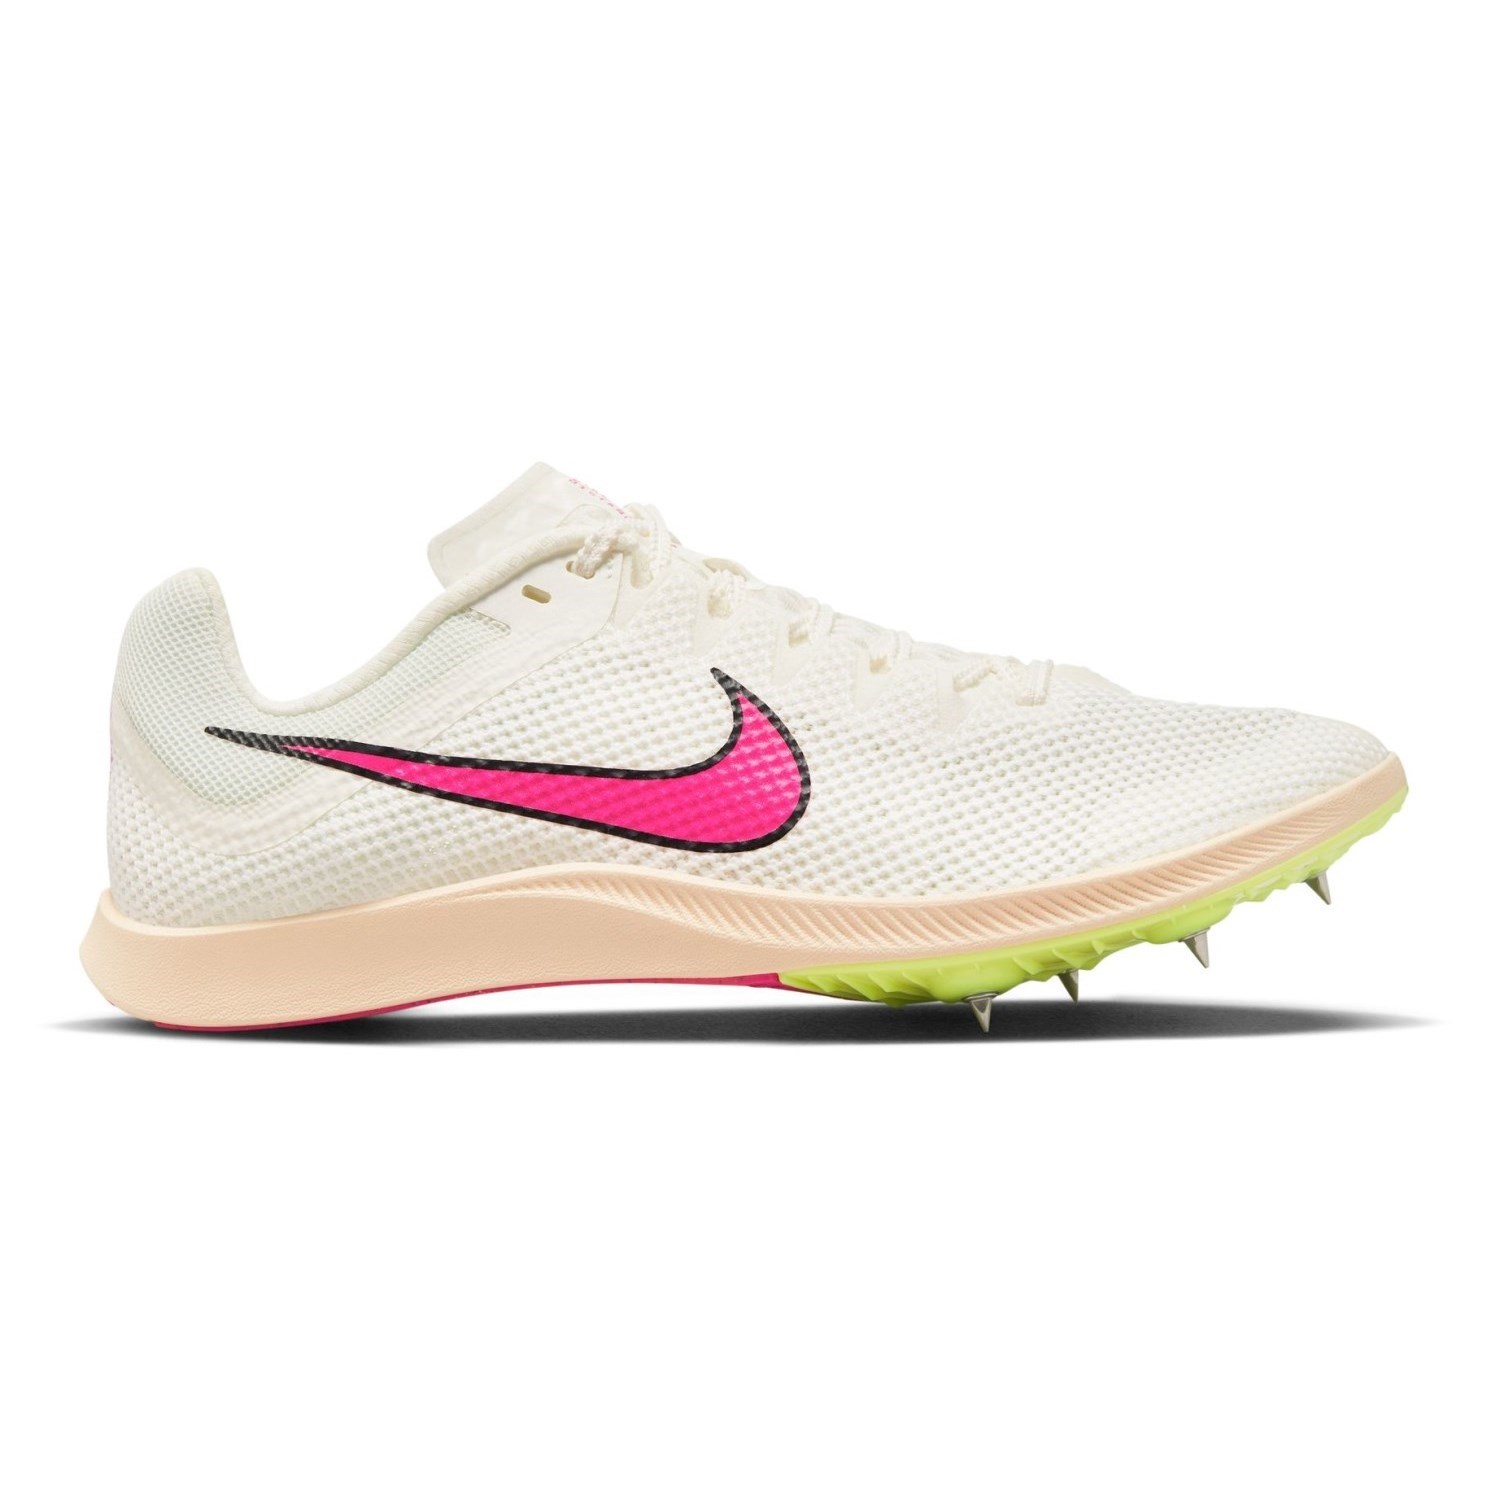 Nike Zoom Rival Distance - Unisex Track Running Spikes - Sail/Fierce ...